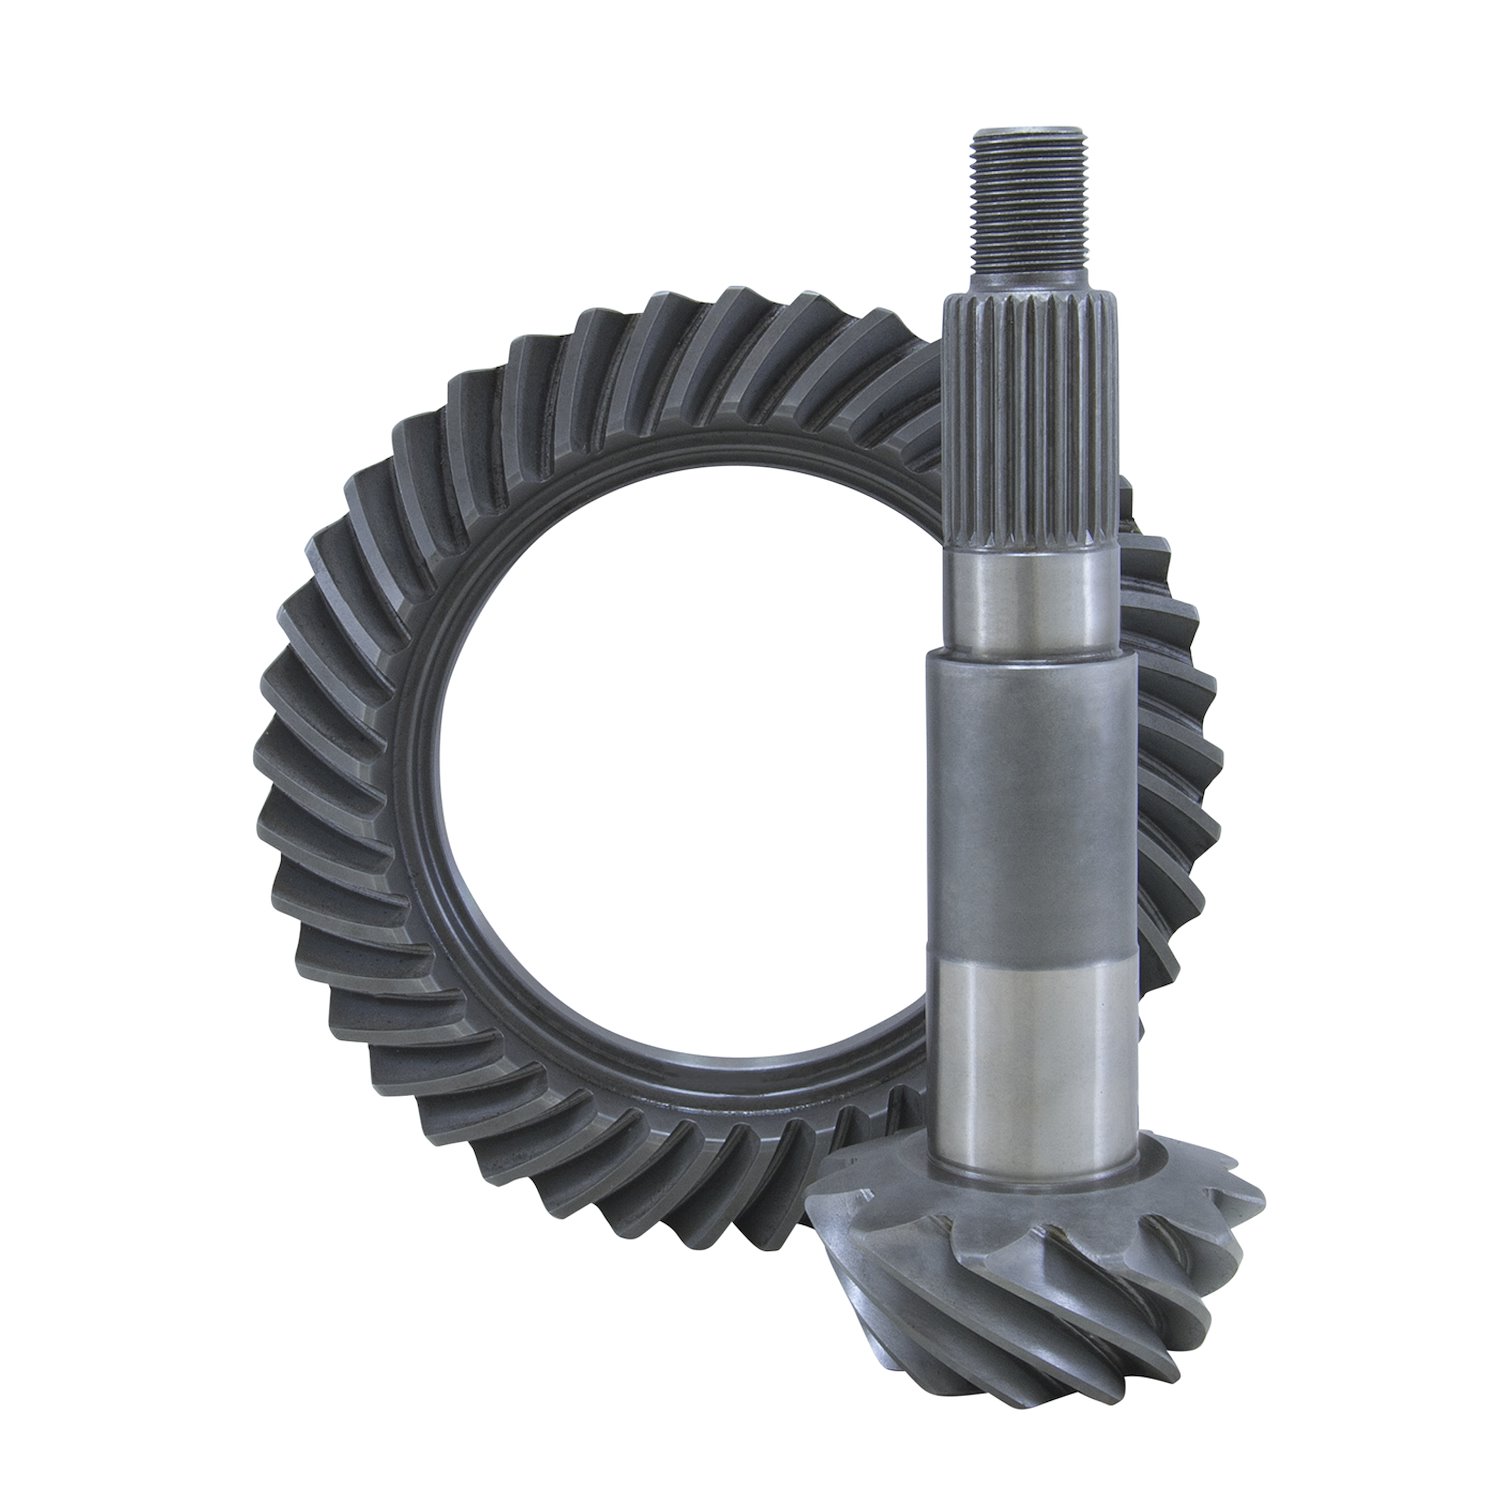 USA Standard ZG D30-427 Ring & Pinion Replacement Gear Set, For Dana 30, 4.27 Ratio